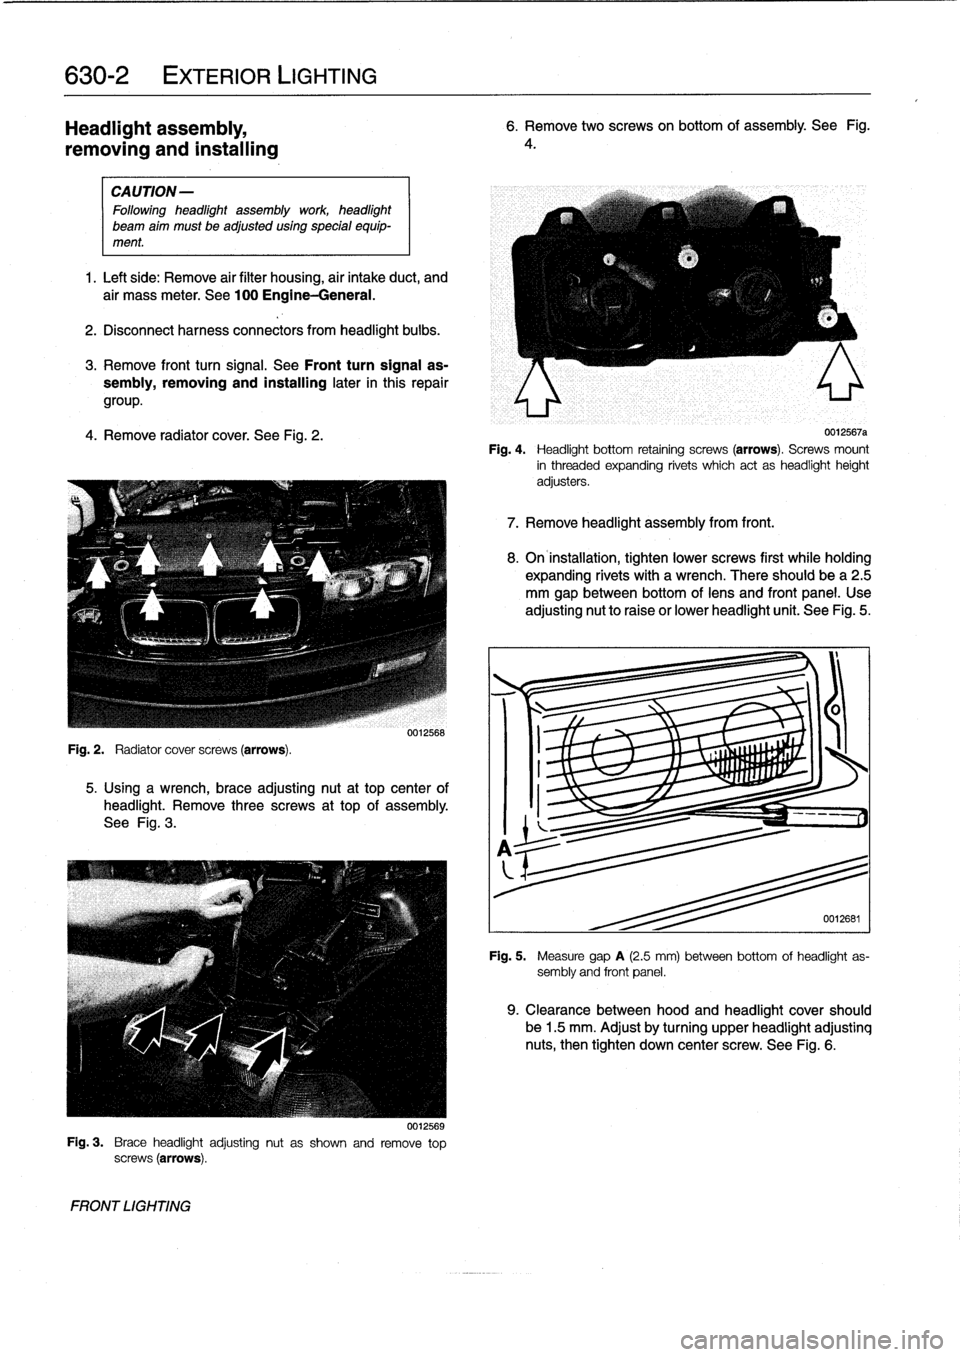 BMW 328i 1994 E36 Workshop Manual 
630-2

	

EXTERIOR
LIGHTING

Headlight
assembly,

removing
and
installing

CAUTION-

Followingheadlight
assembly
work
headlight

beam
aim
must
be
adjusted
using
special
equip-
ment
.

1
.
Left
side
: